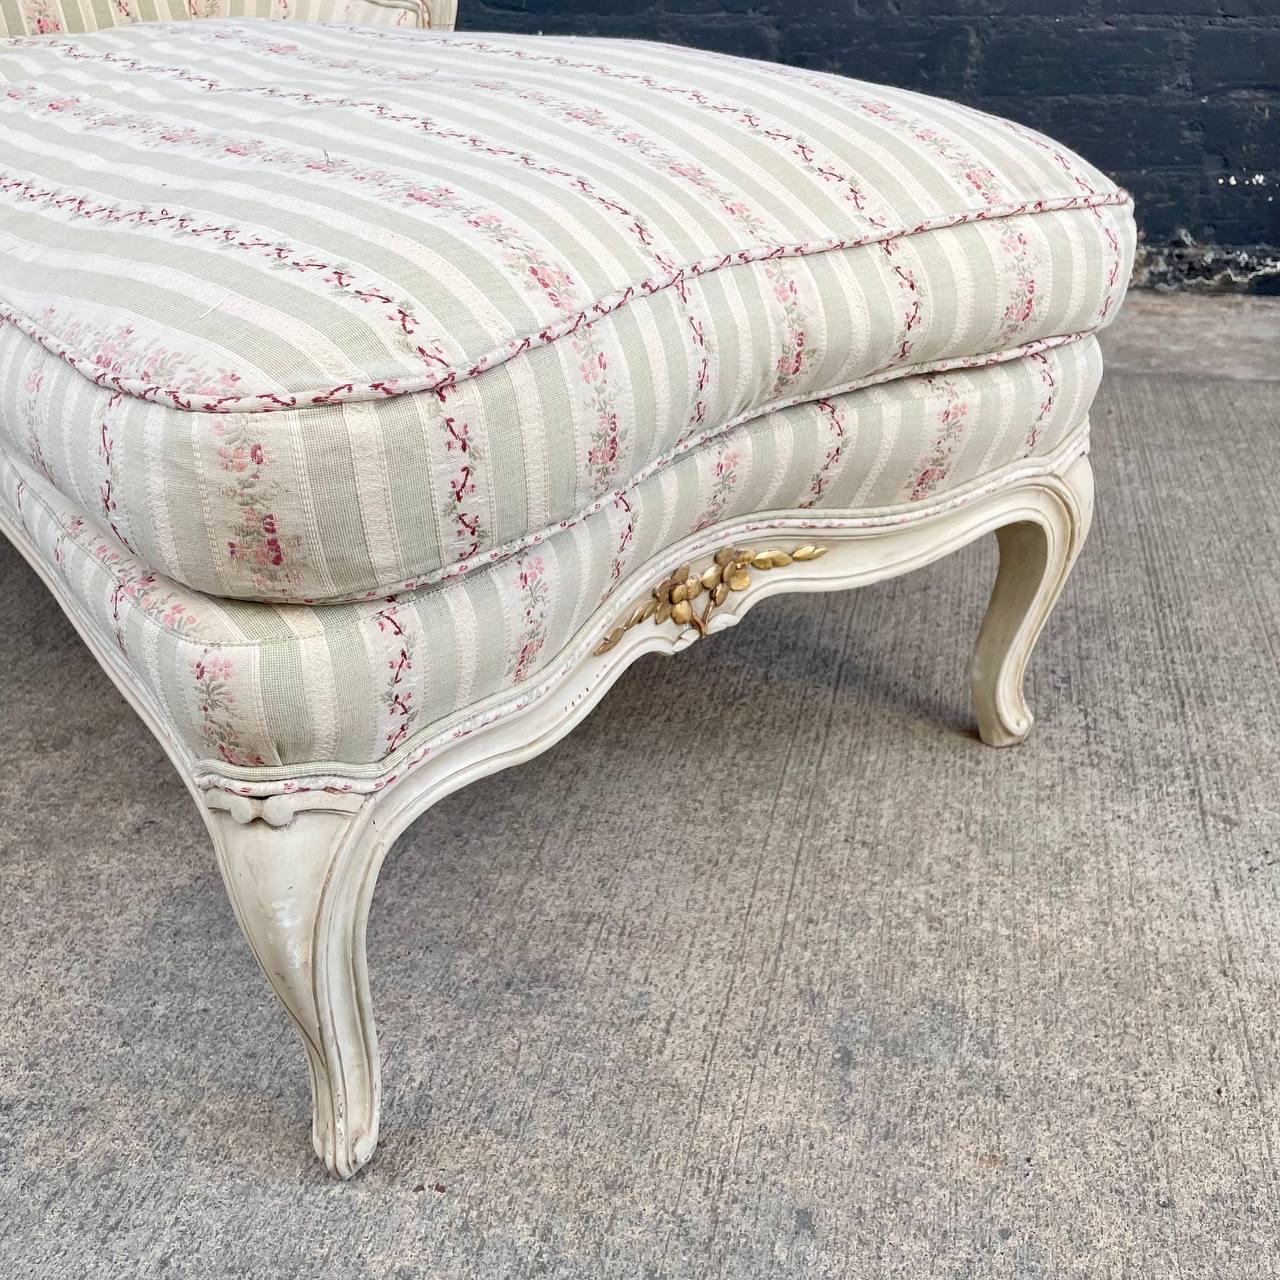 Upholstery Vintage French Provincial Style Chaise Lounge Chair